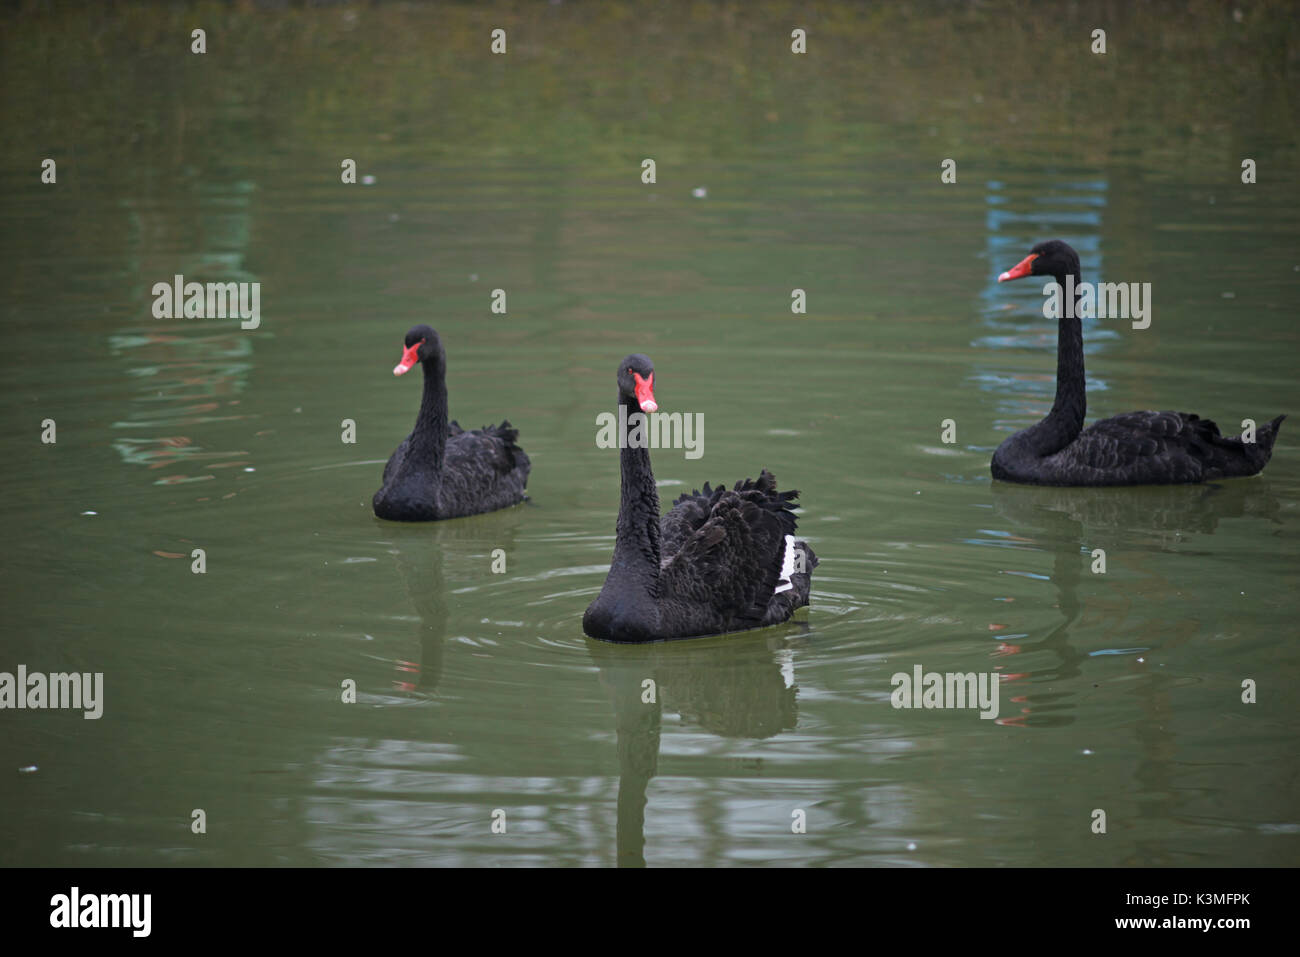 A group of Black Swans floating on the pond surface Stock Photo